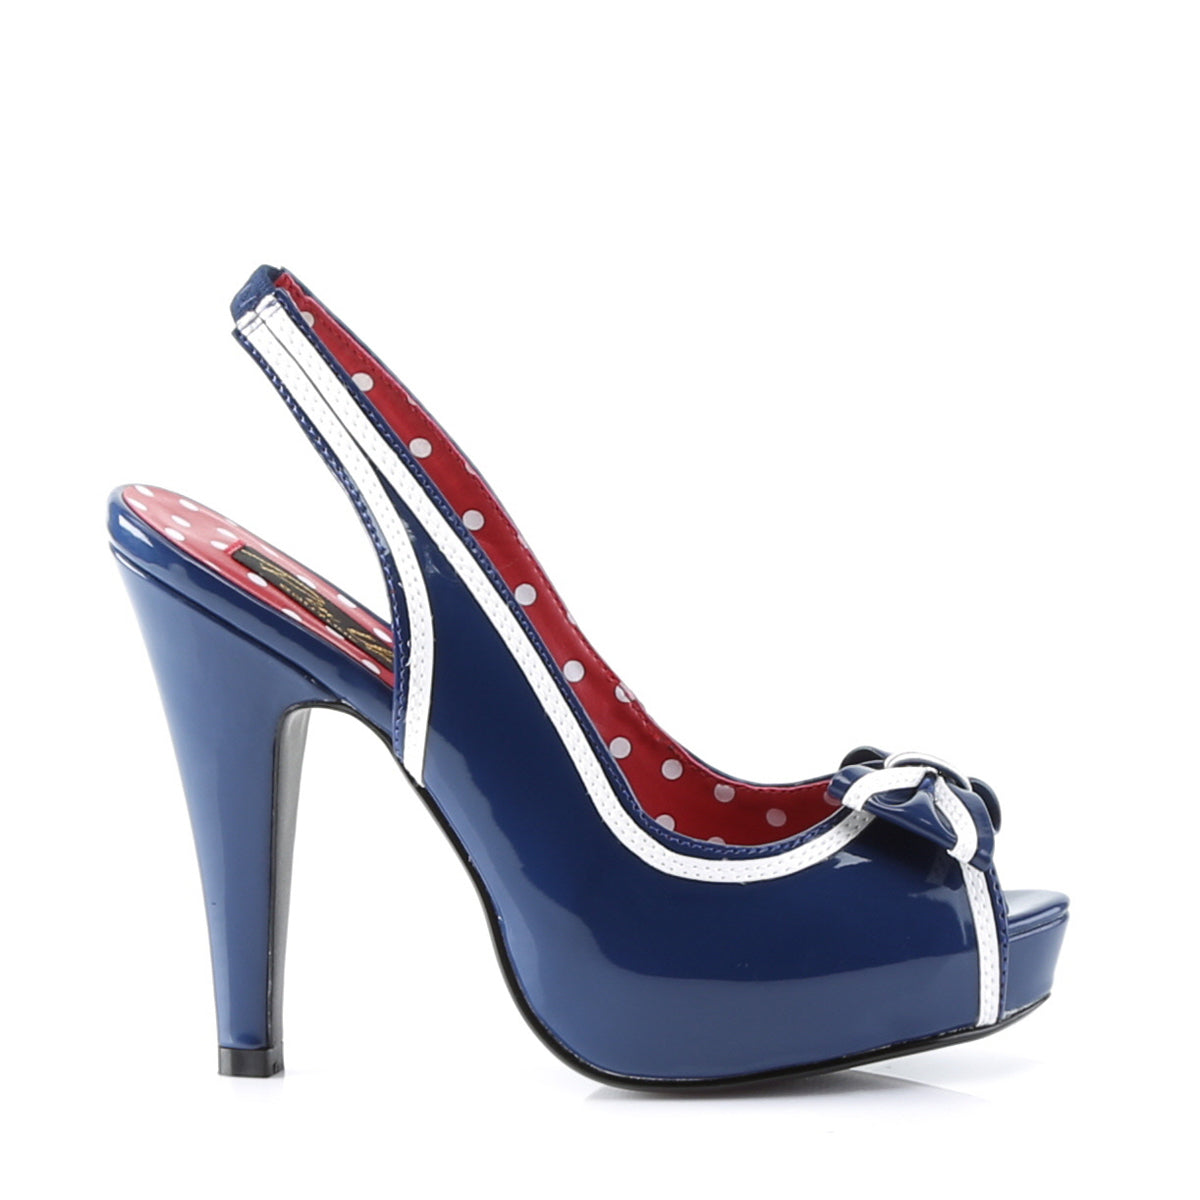 BETTIE-05 Pin Up Couture Navy Blue Patent Platforms [Retro Glamour Shoes]